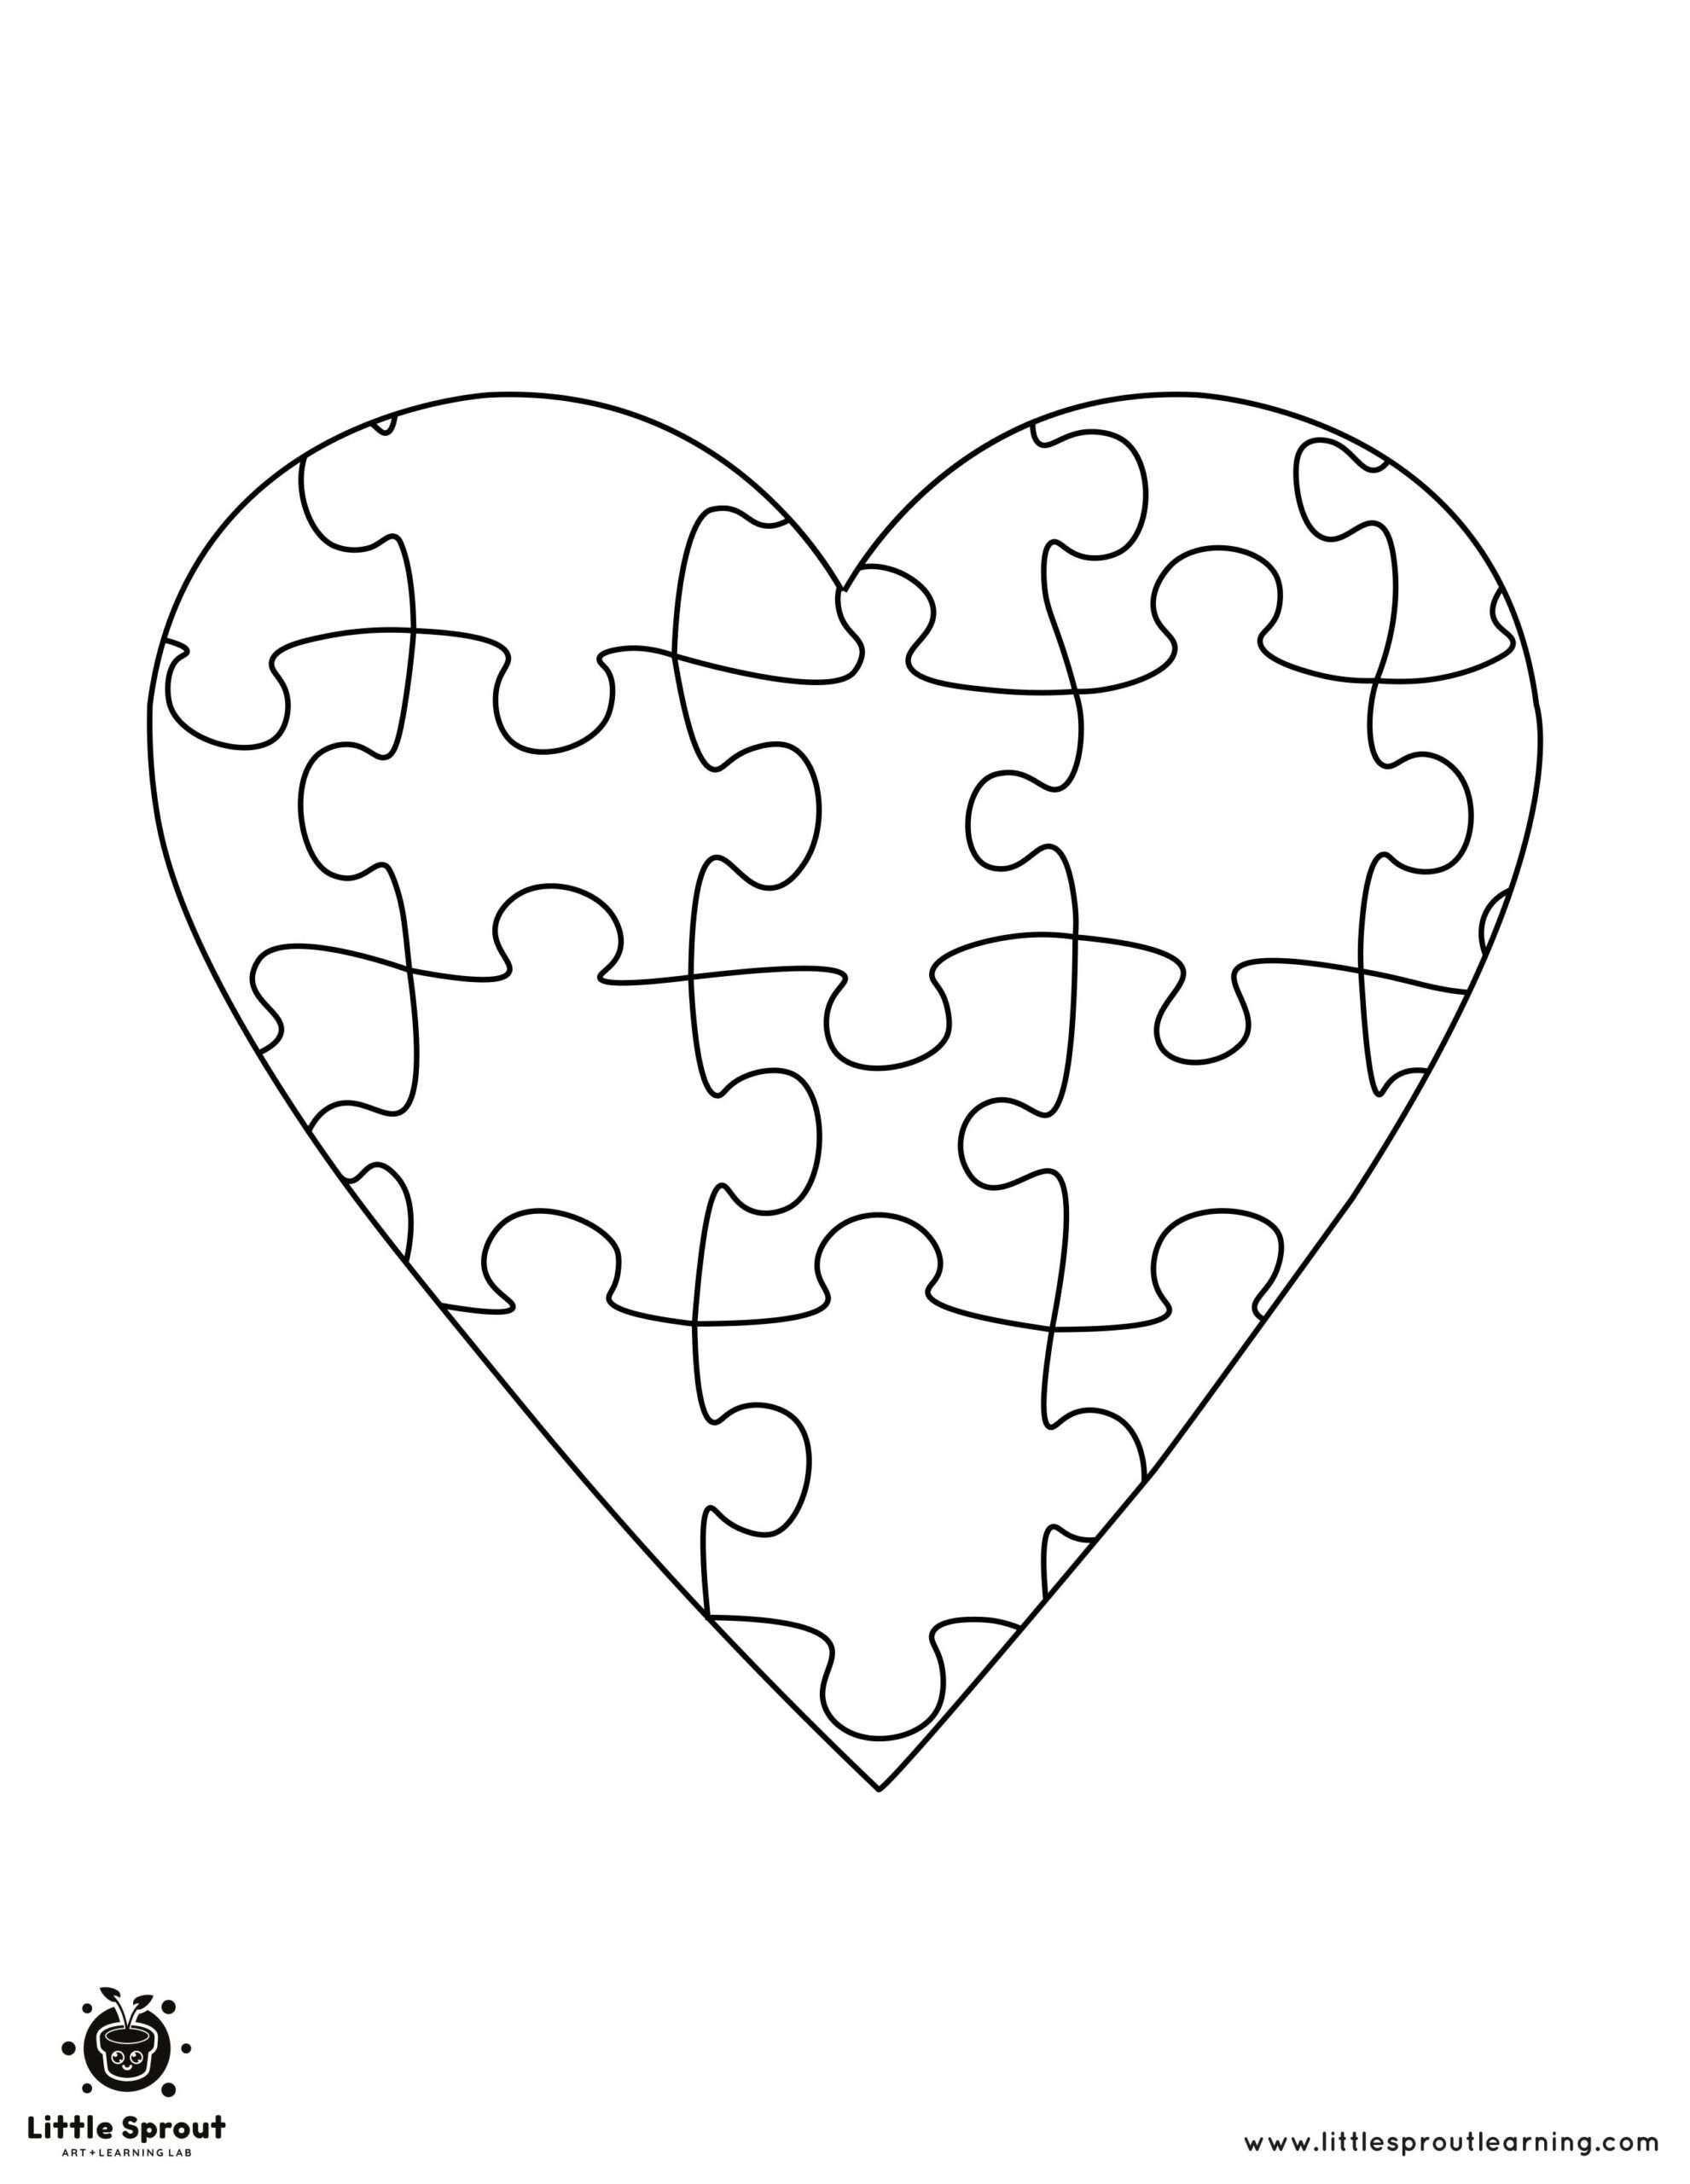 Coloring Page Hearts 1 Little Sprout Learning scaled